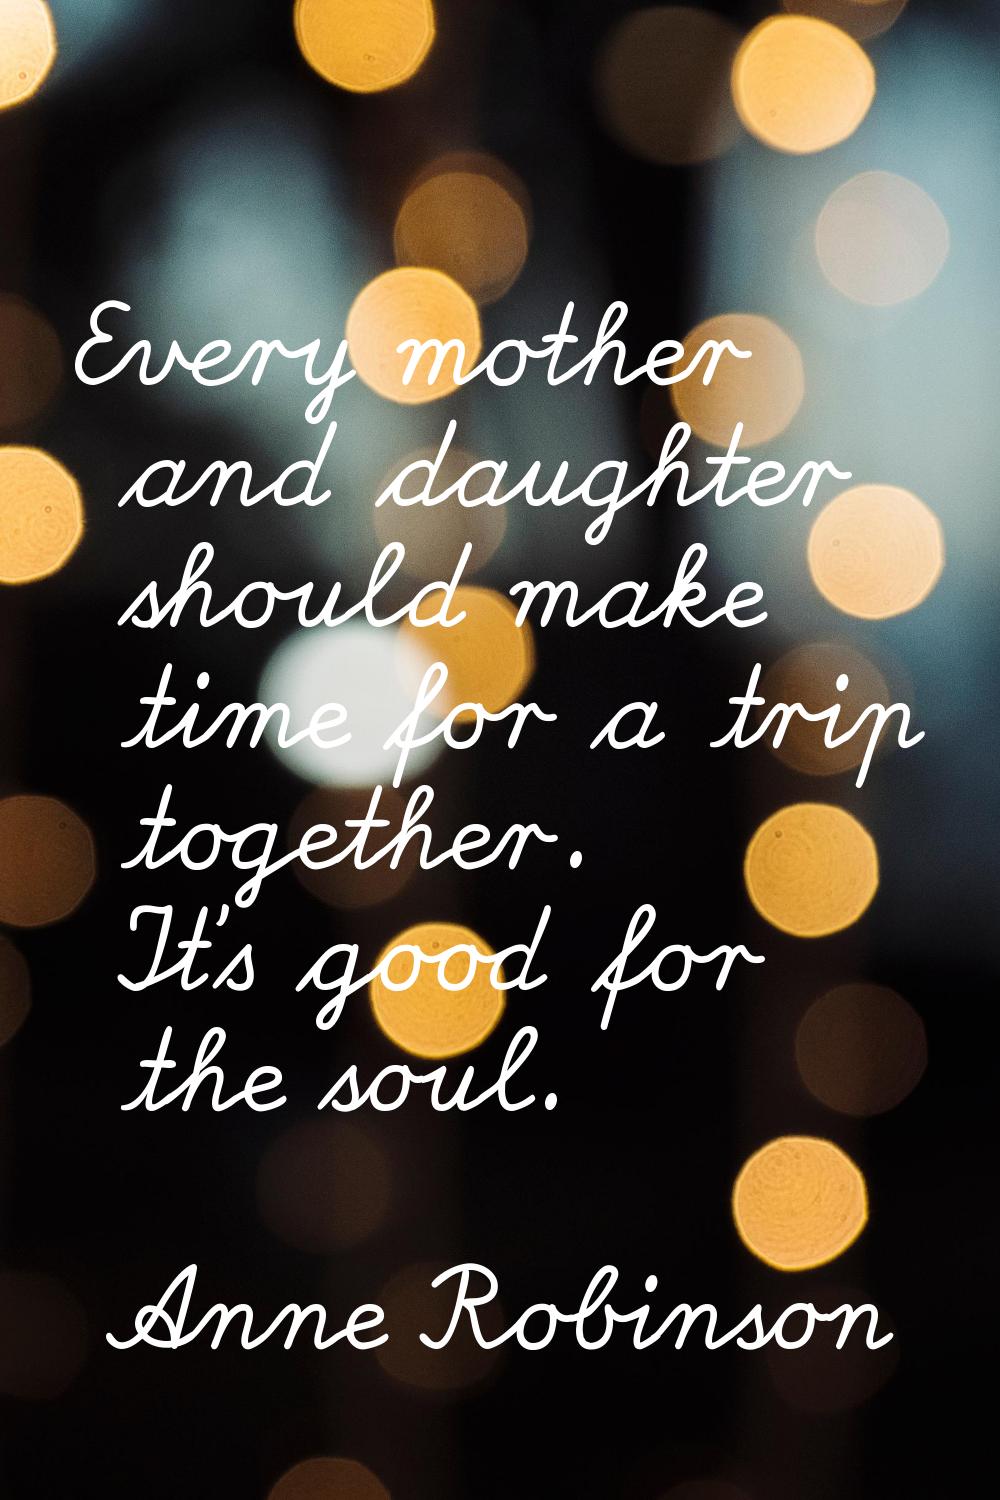 Every mother and daughter should make time for a trip together. It's good for the soul.